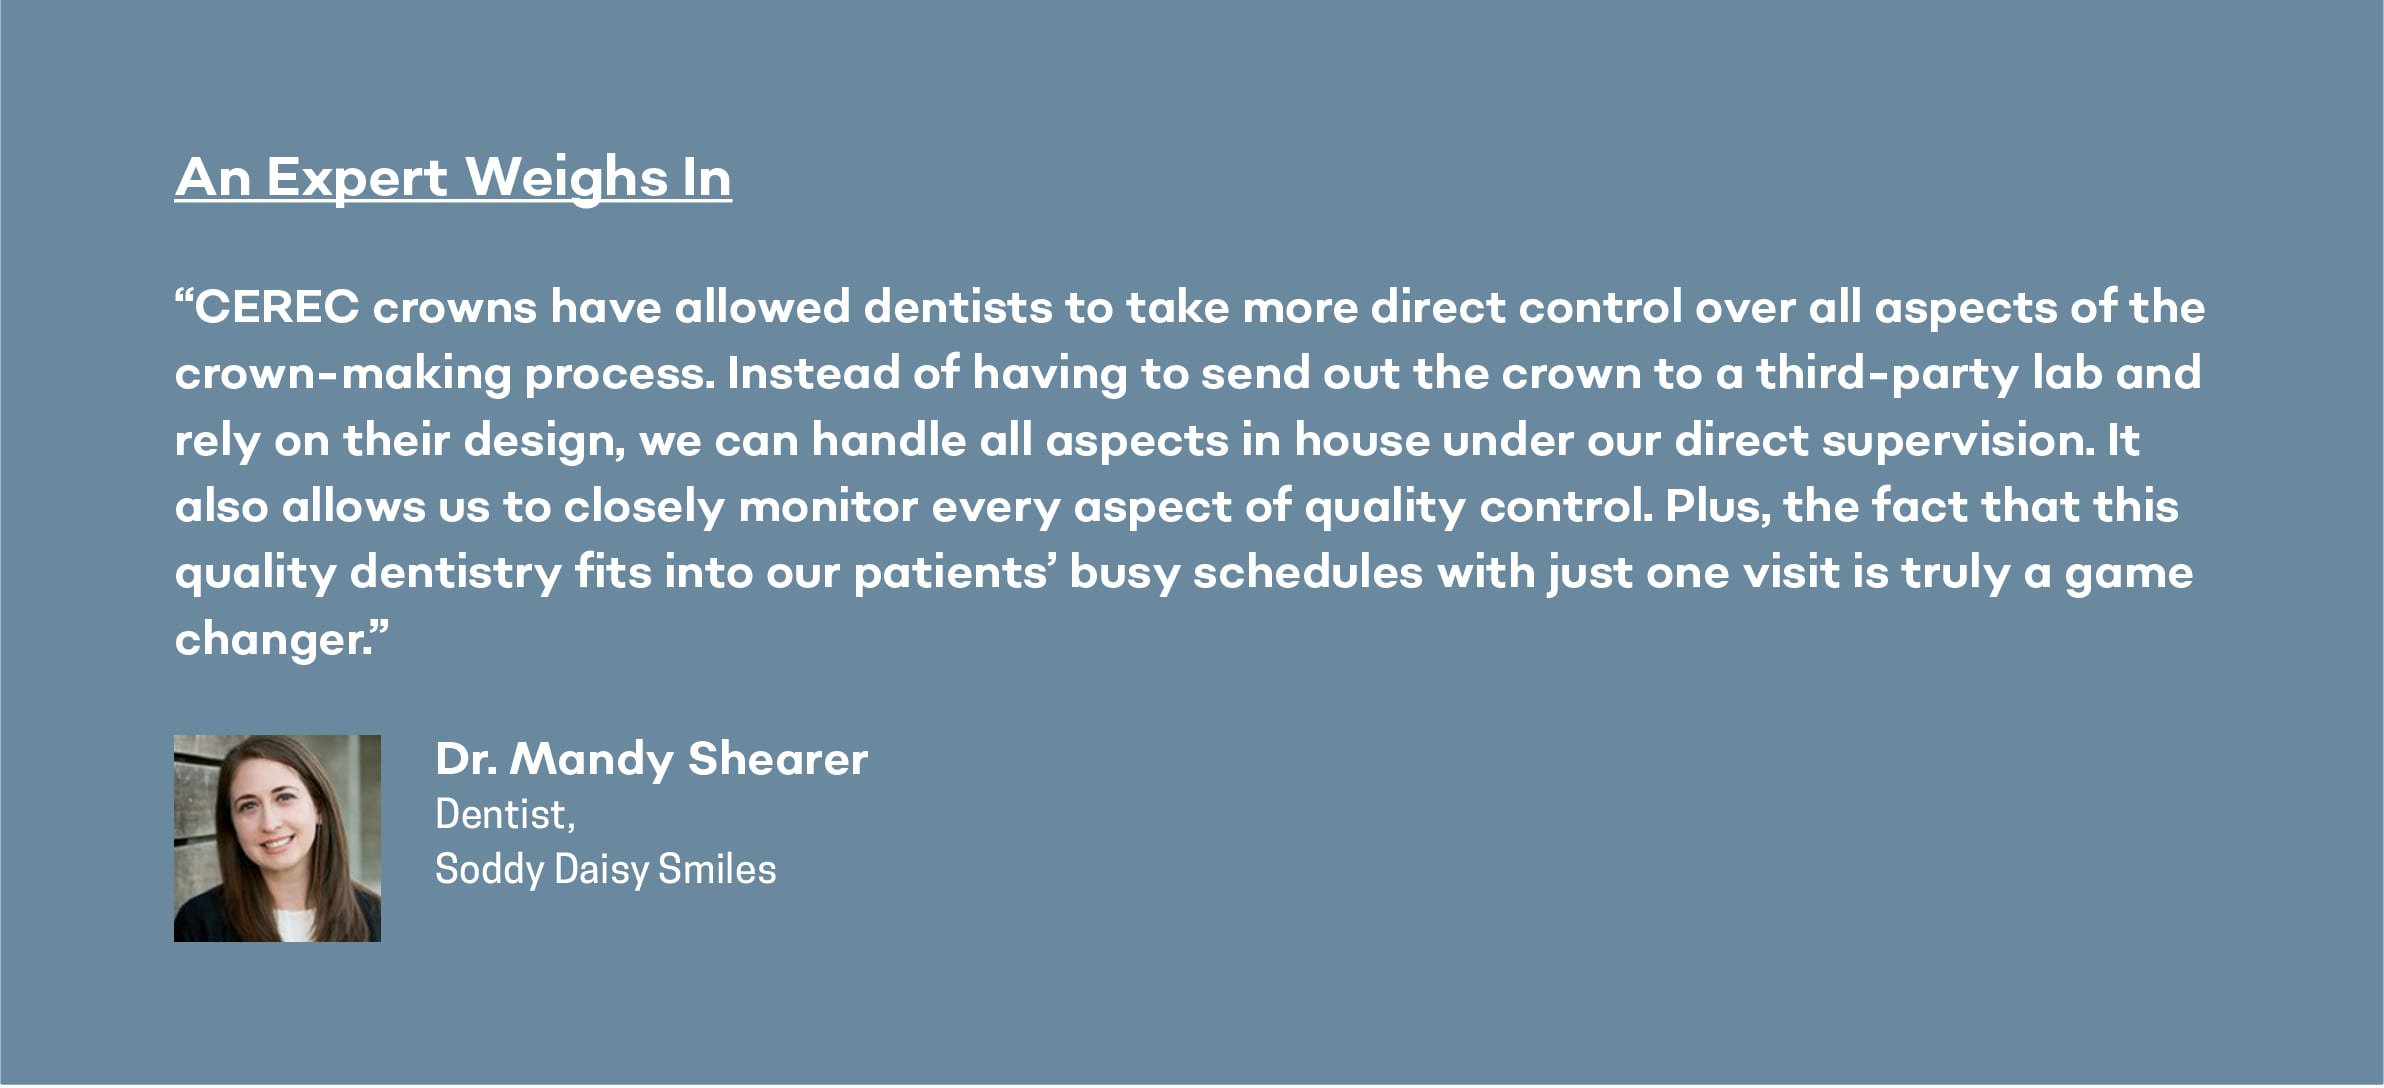 expert opinion on CEREC same day crown process from Dr. Mandy Shearer in chattanooga